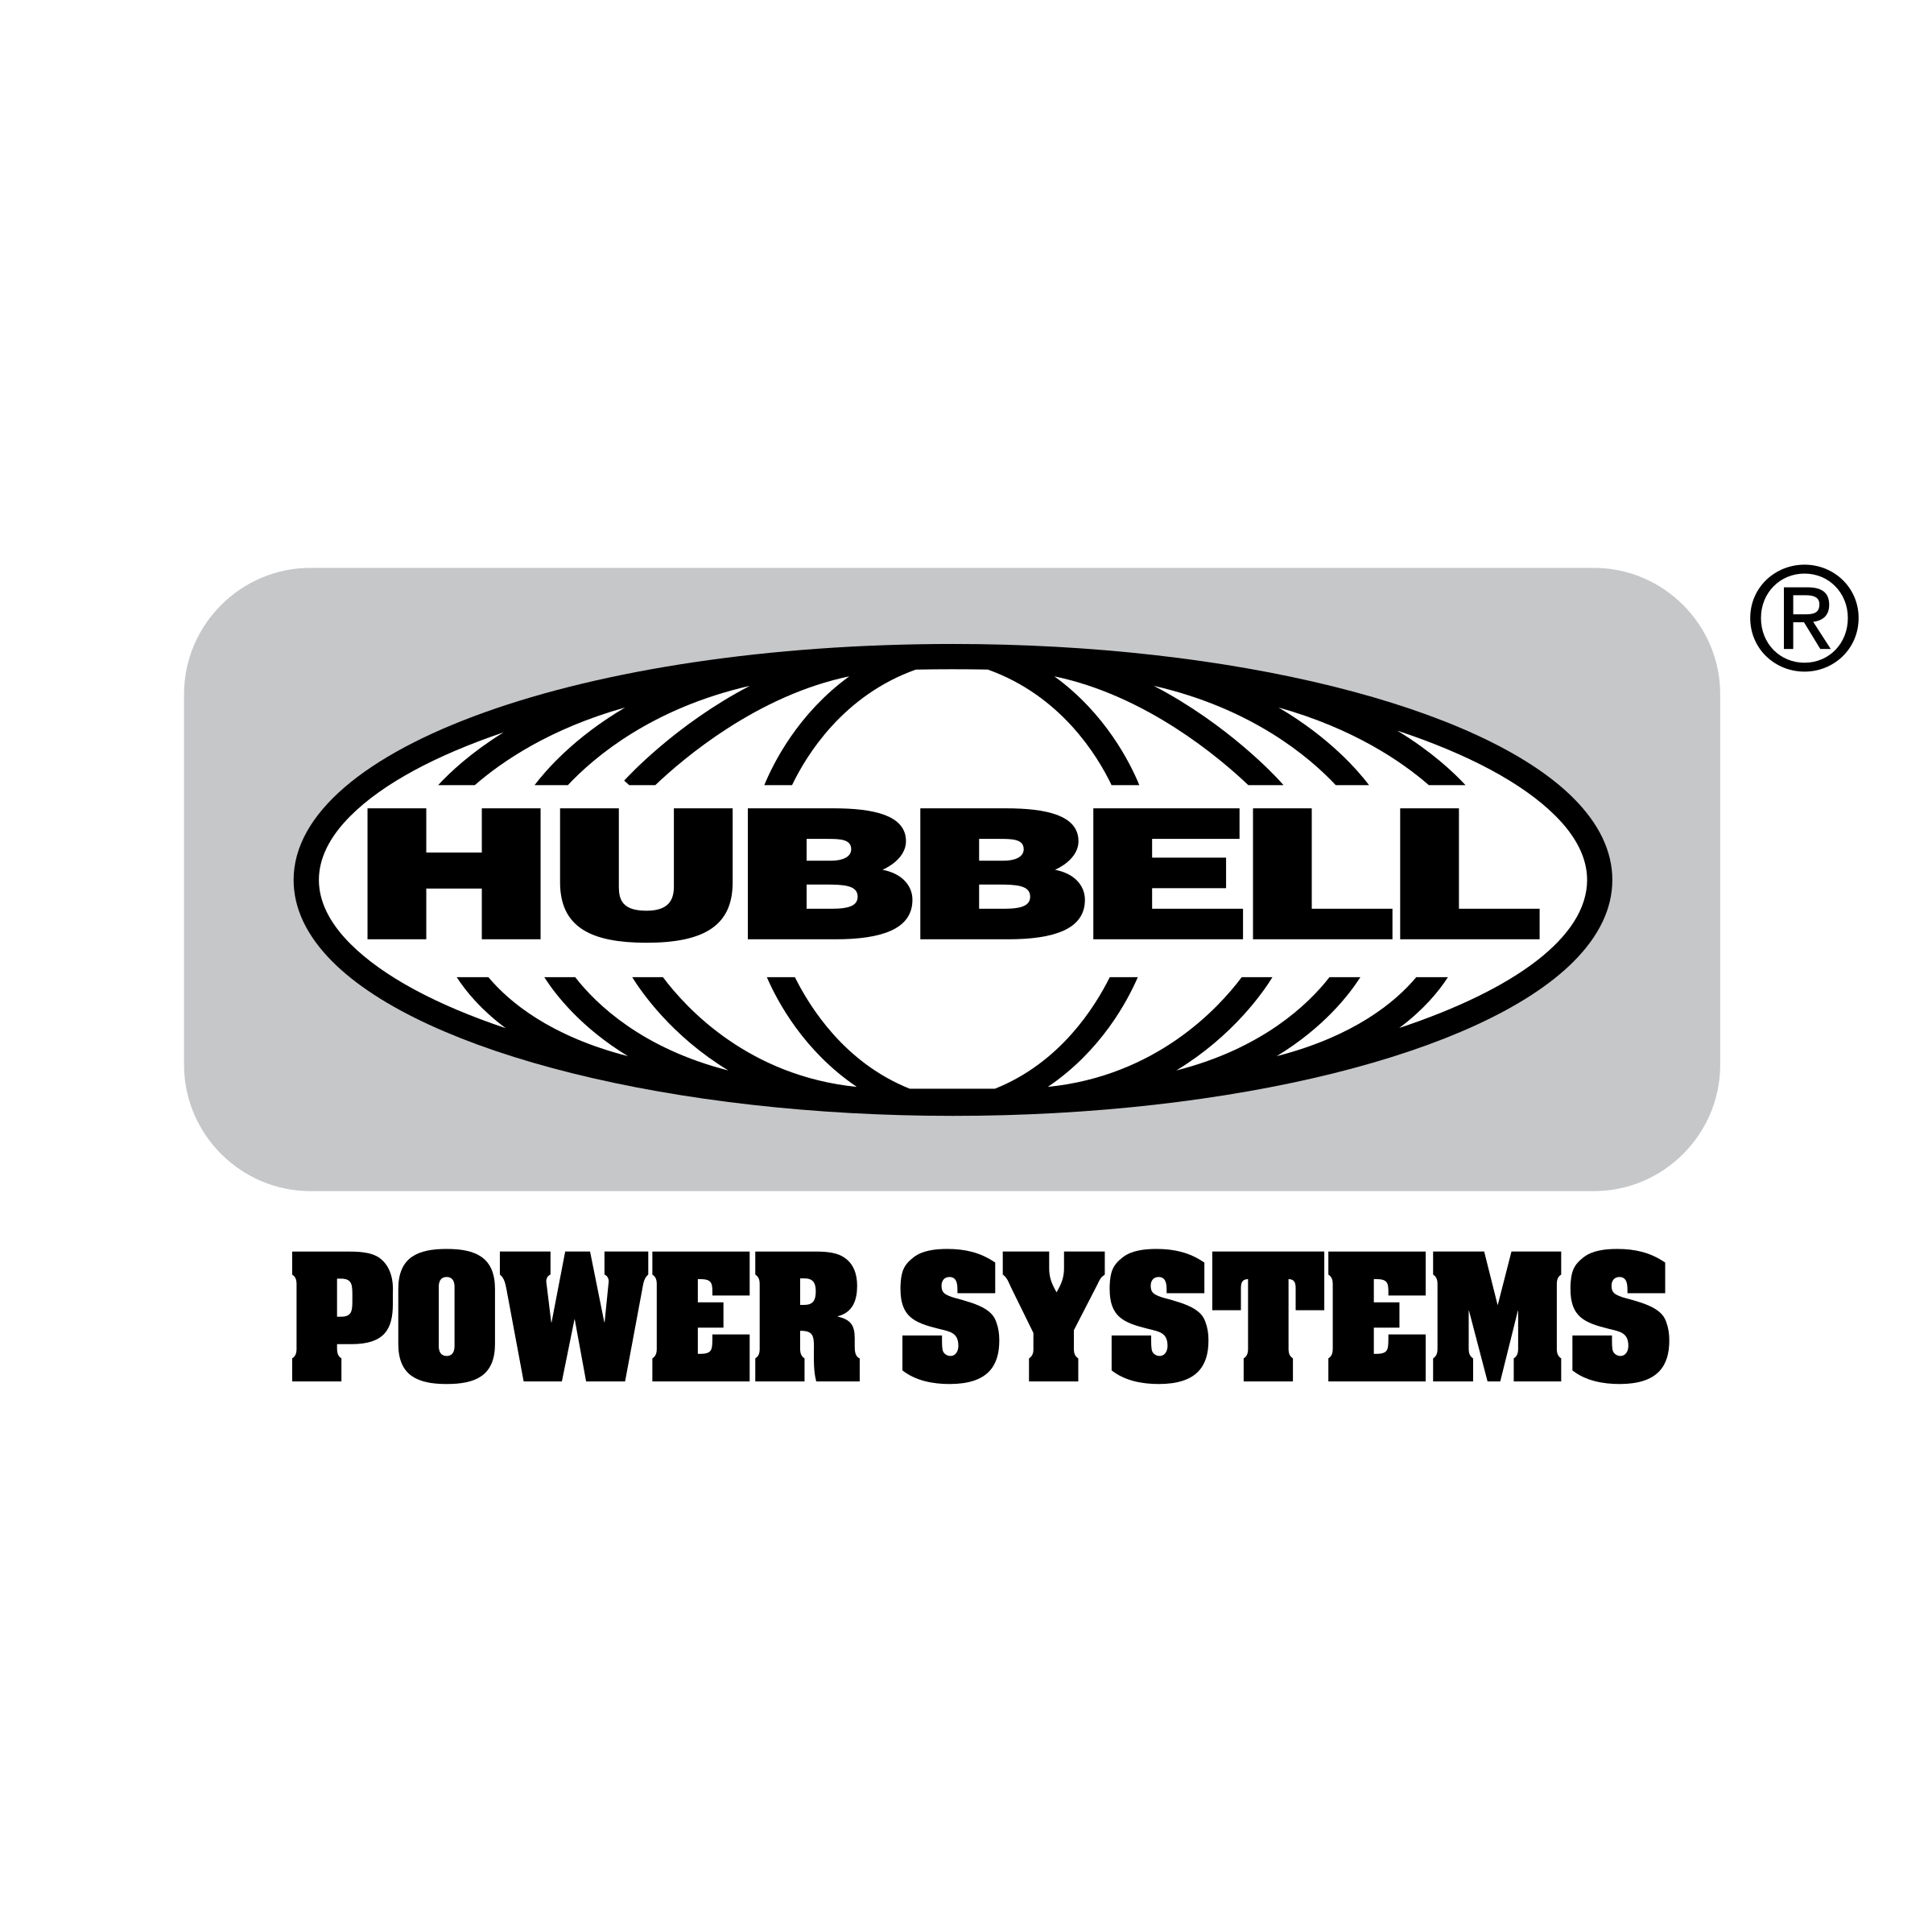 Hubbell Logo - Hubbell Logo PNG Transparent & SVG Vector